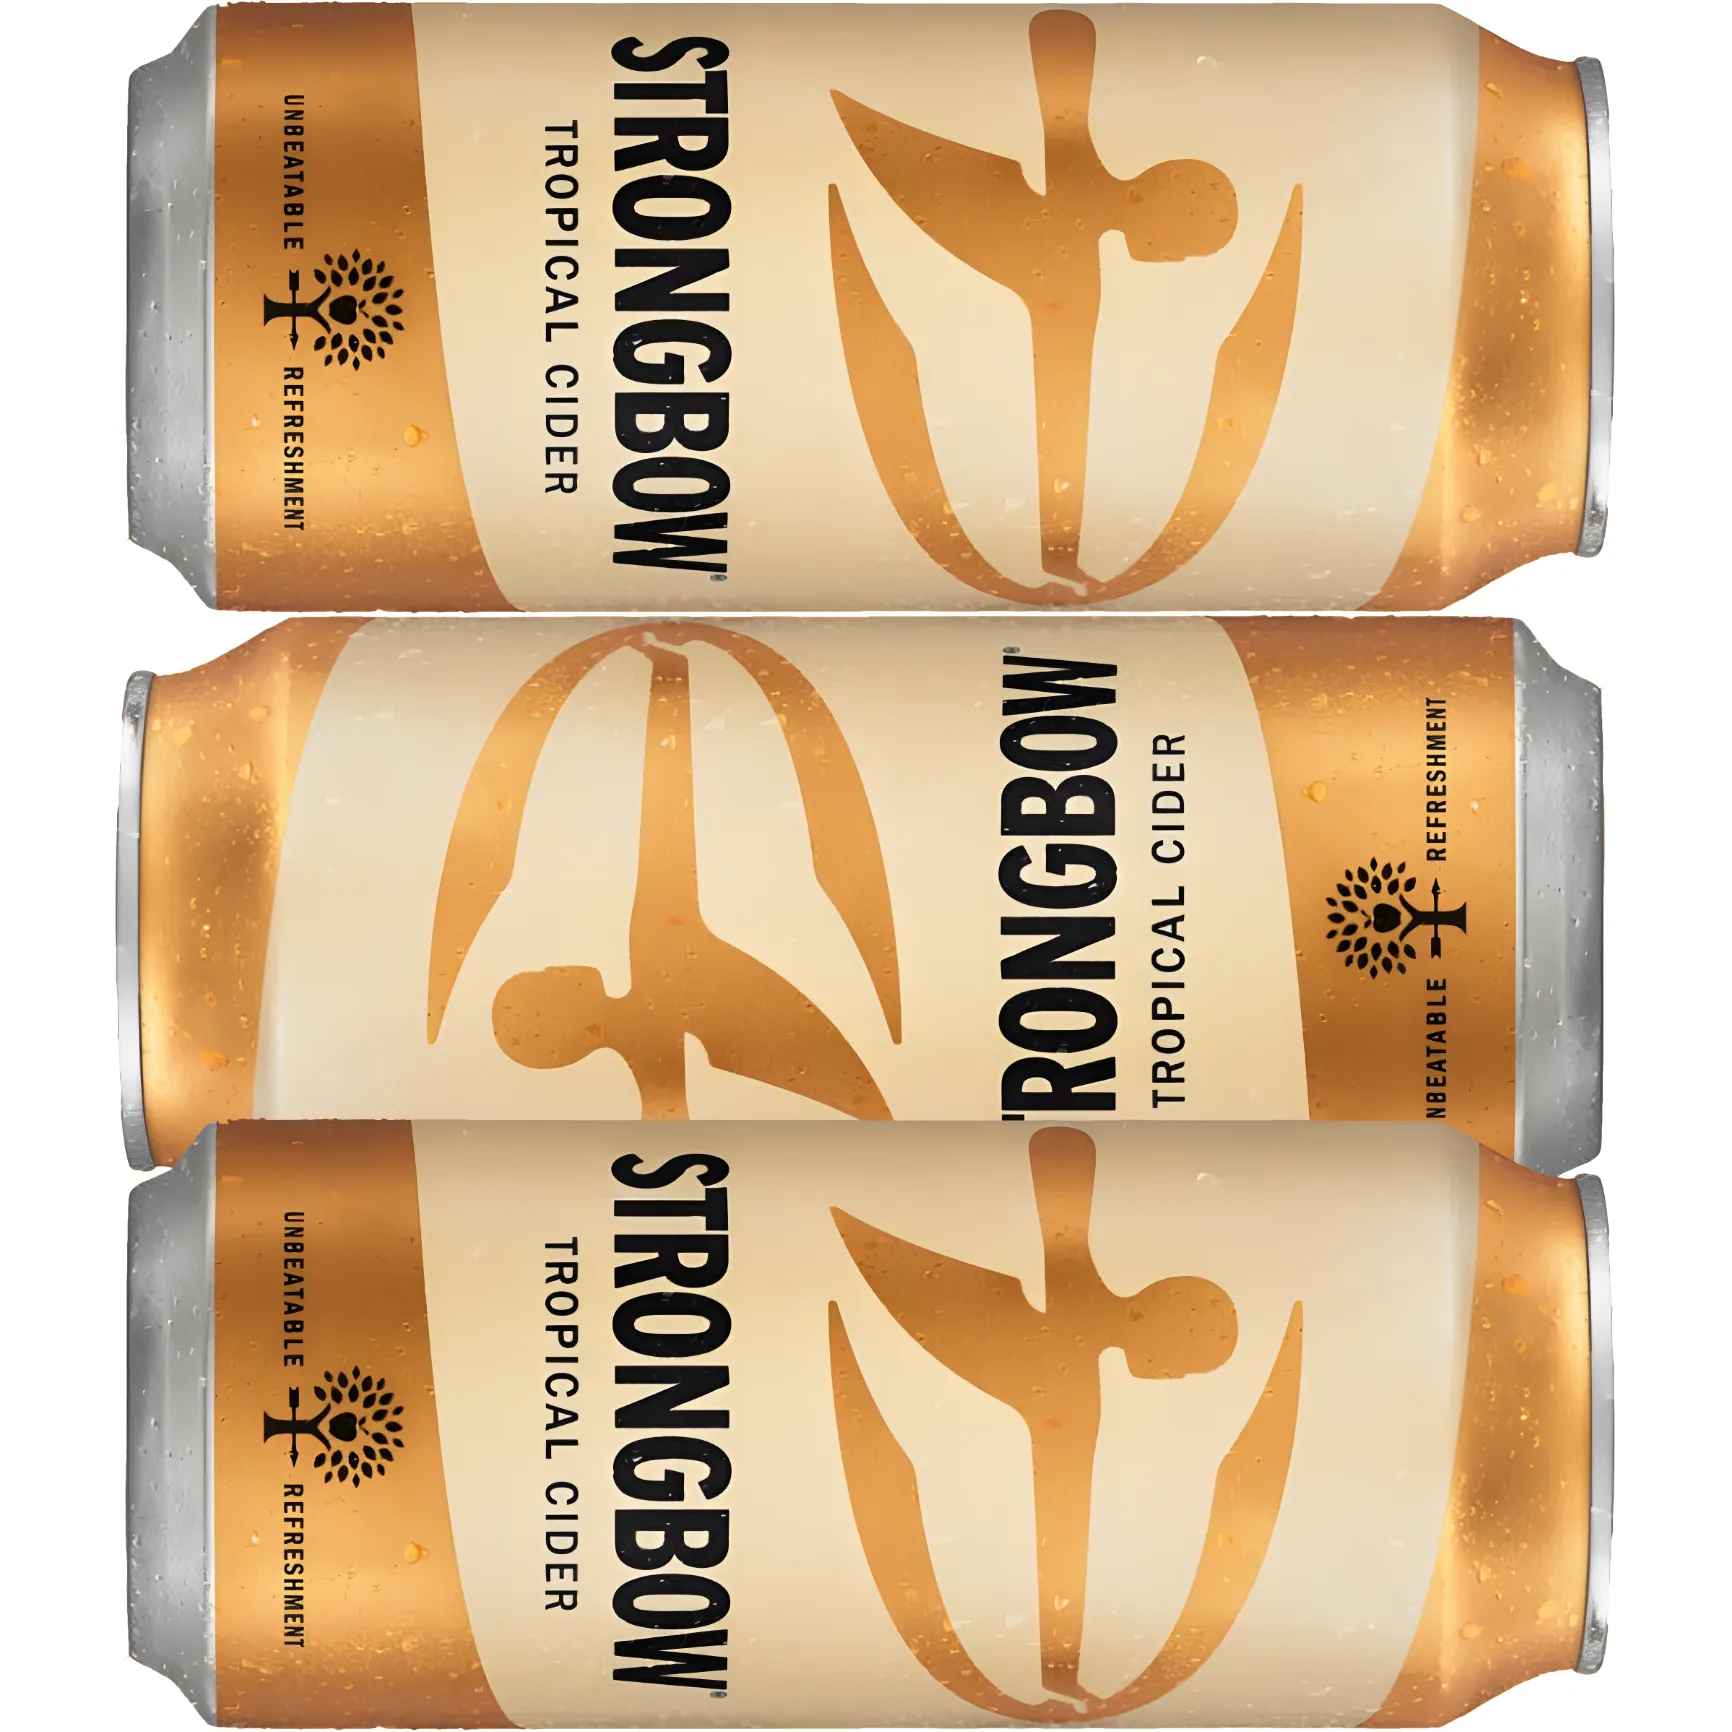 Free Pack Of Strongbow Tropical Cider